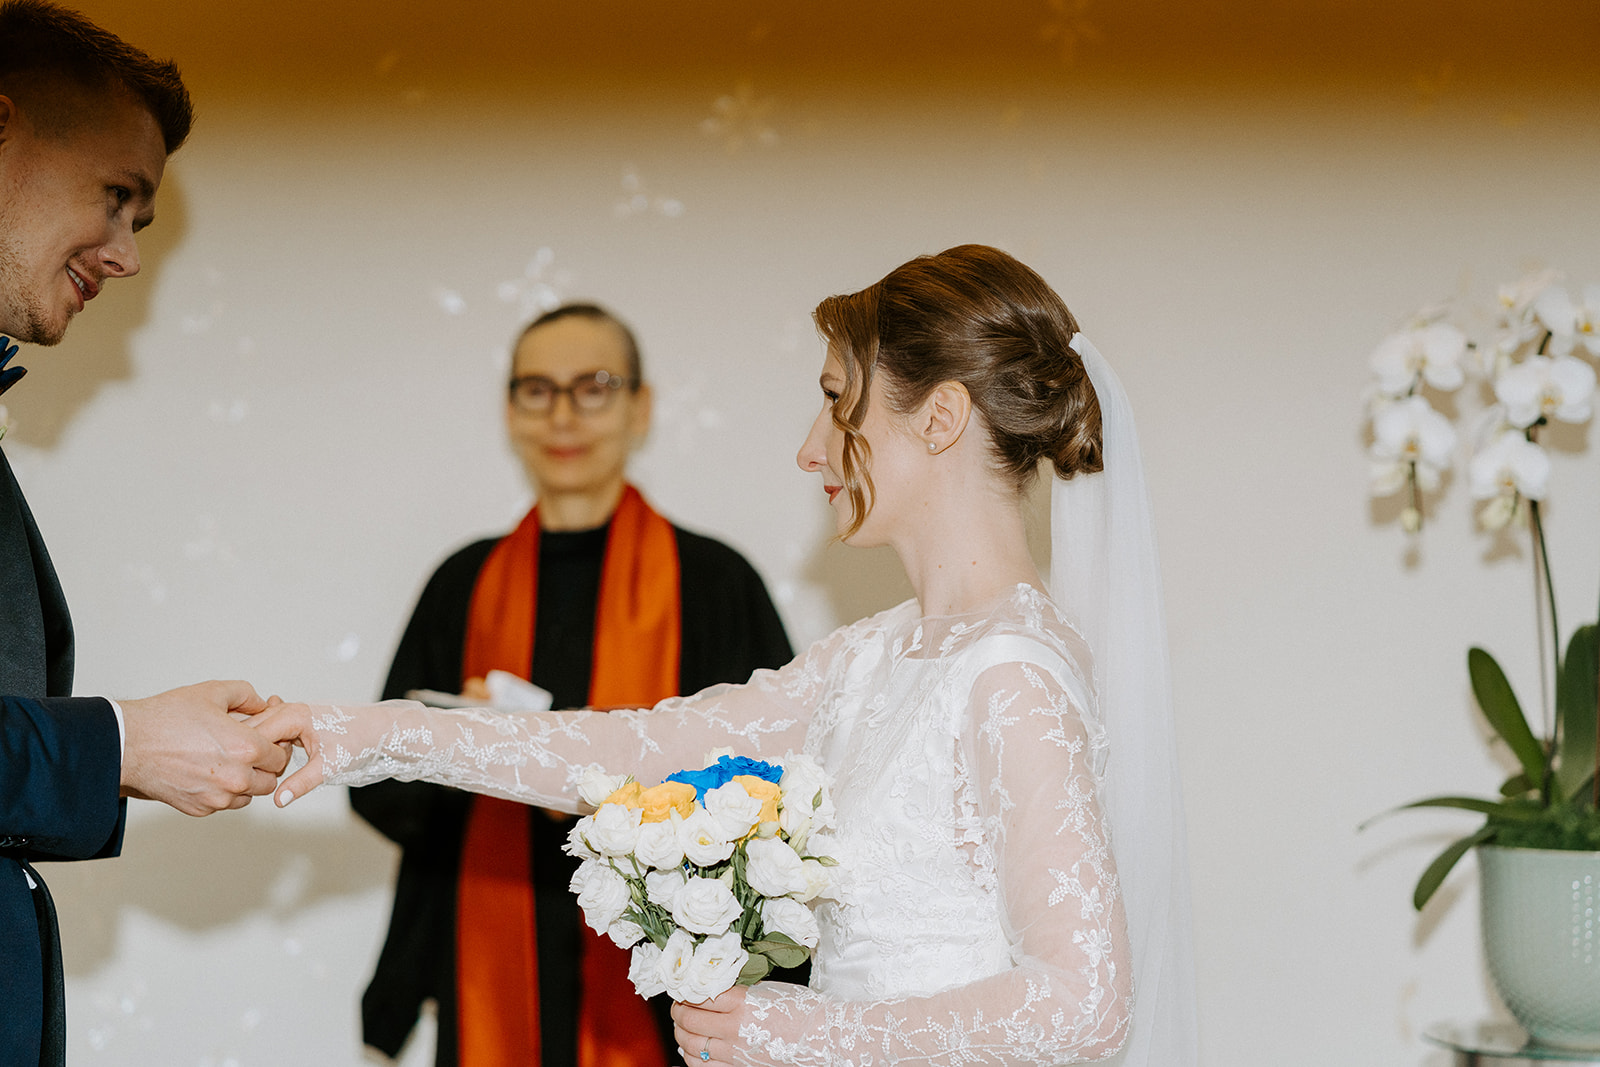 A bride reaching her hand out to the groom.